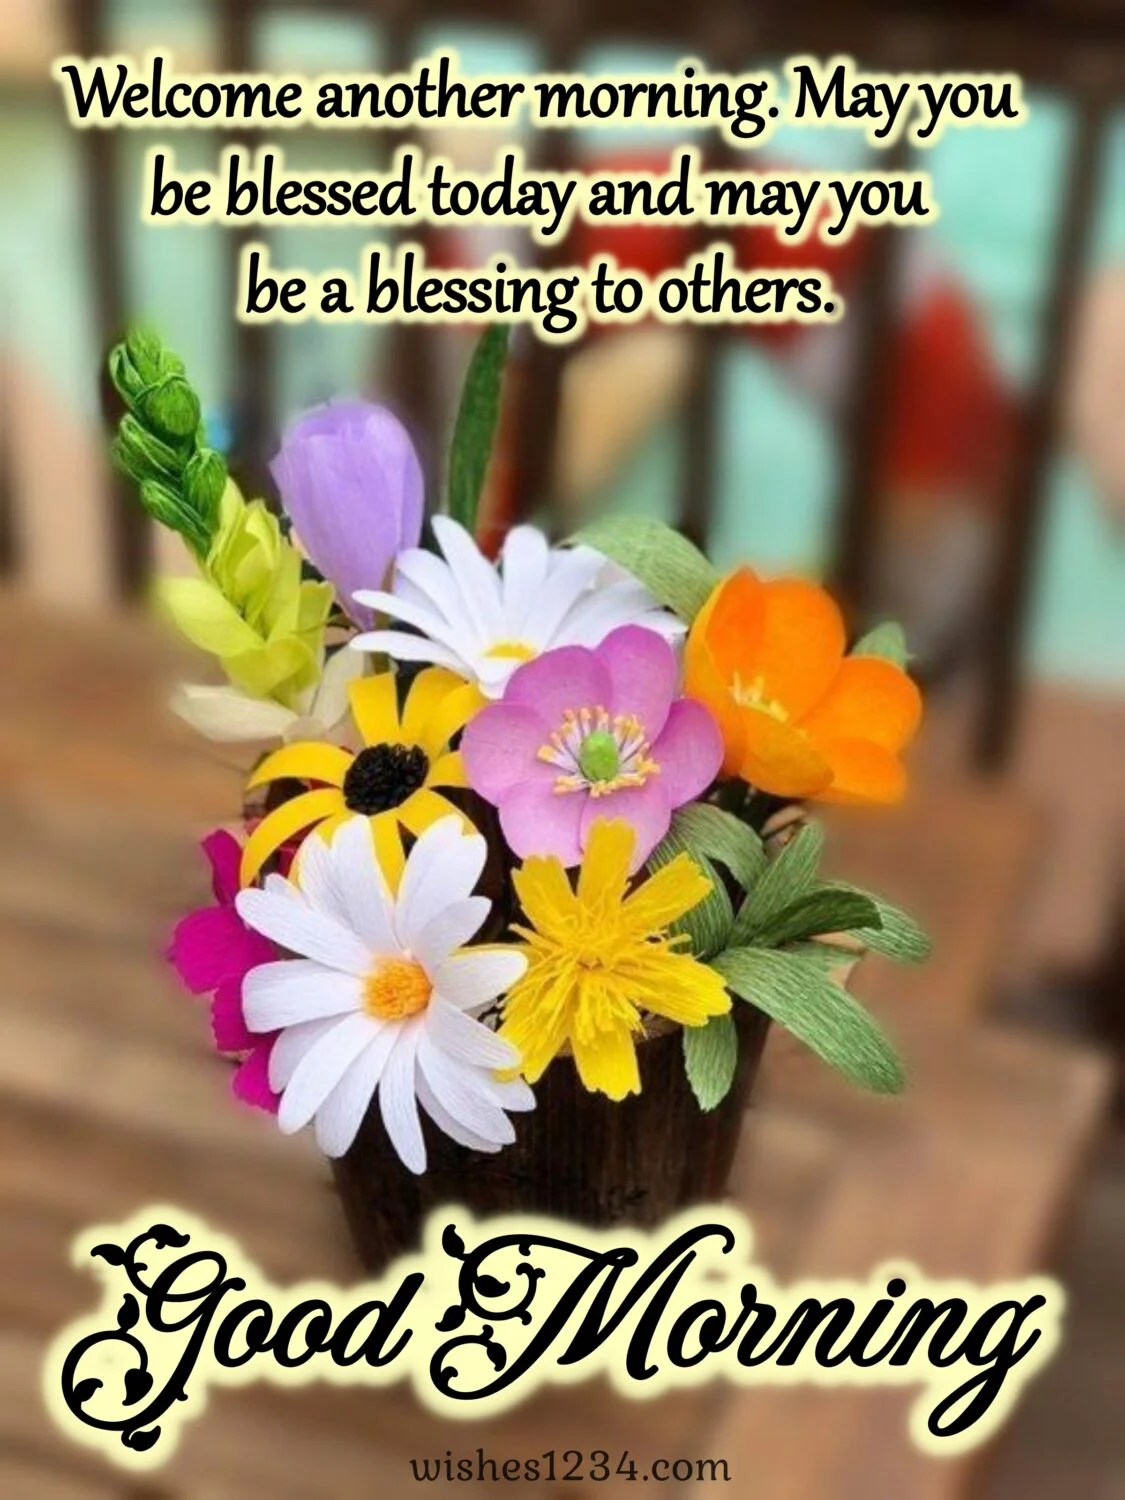 Flower vase with various colourful flowers, Good Morning Message | Good Morning Images.